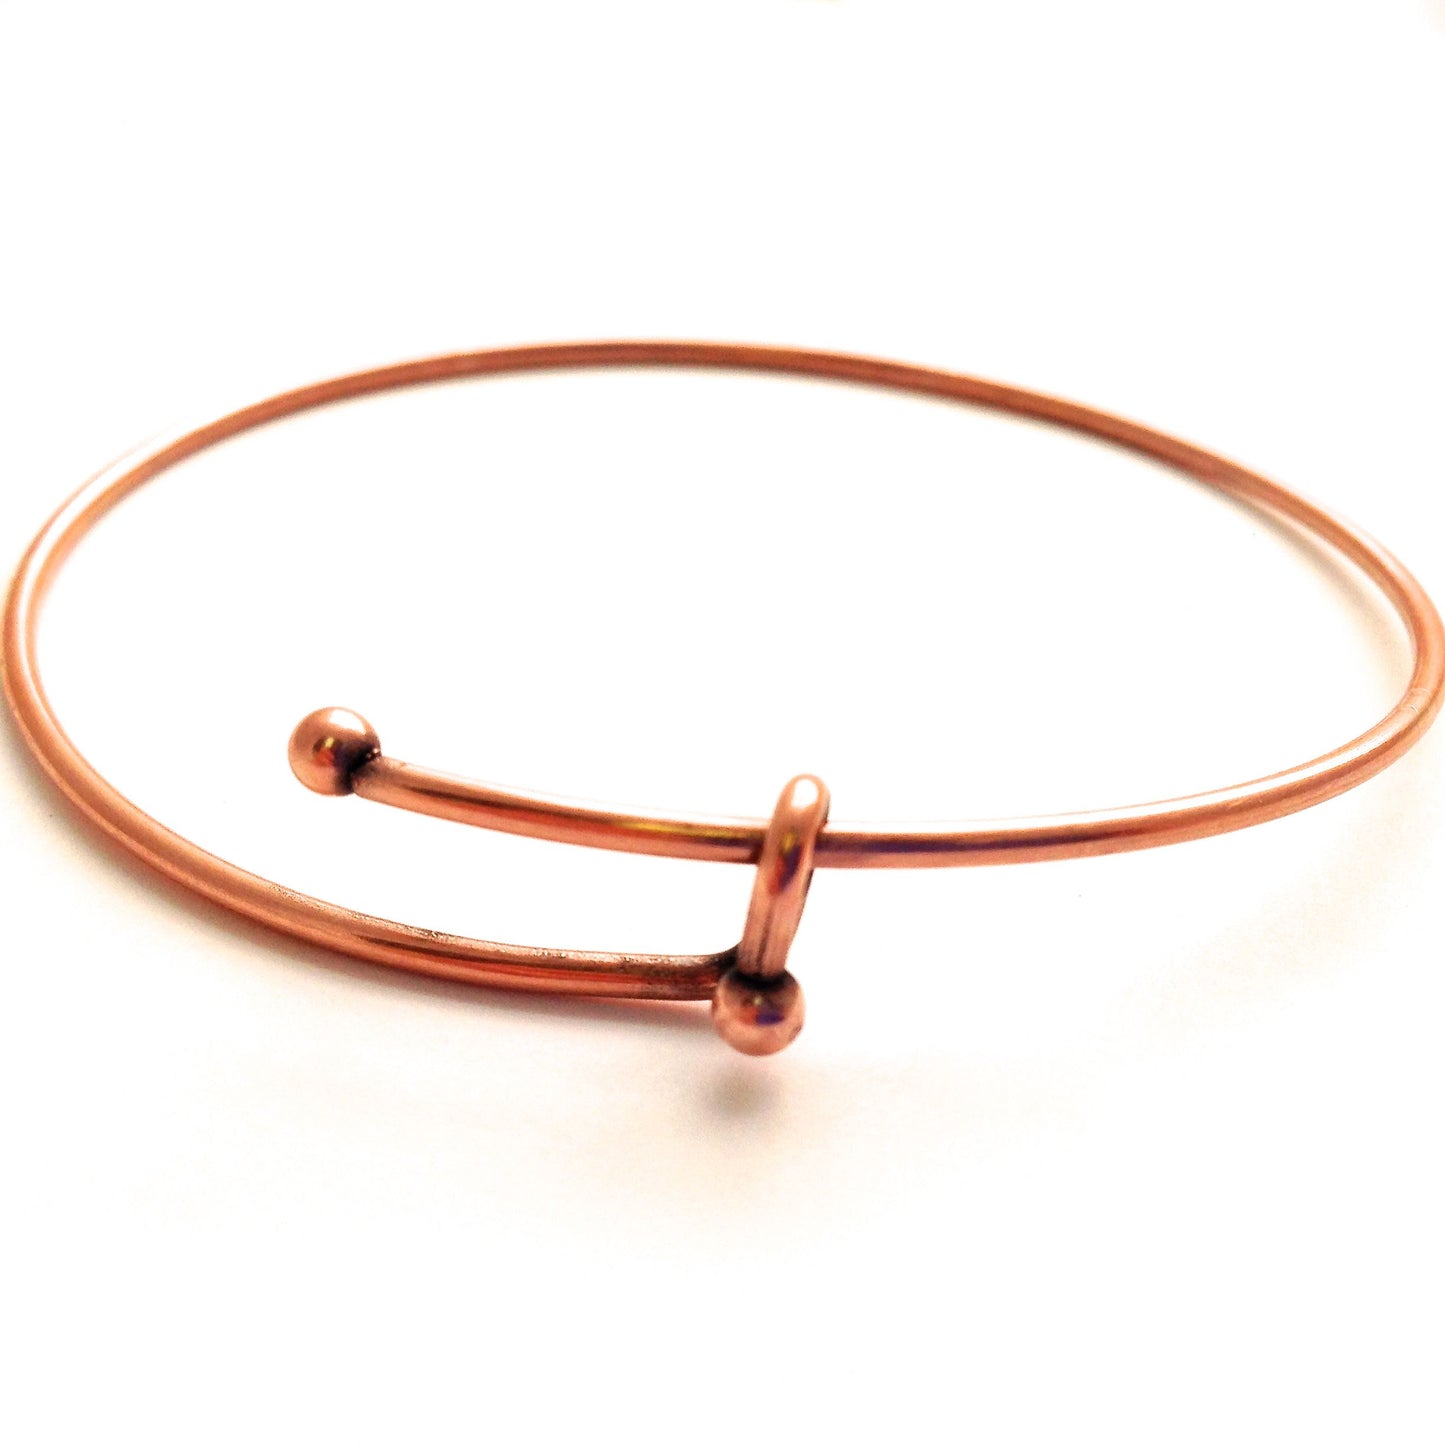 6in Copper Finish Wire Bangle Bracelet with Ball catch, each